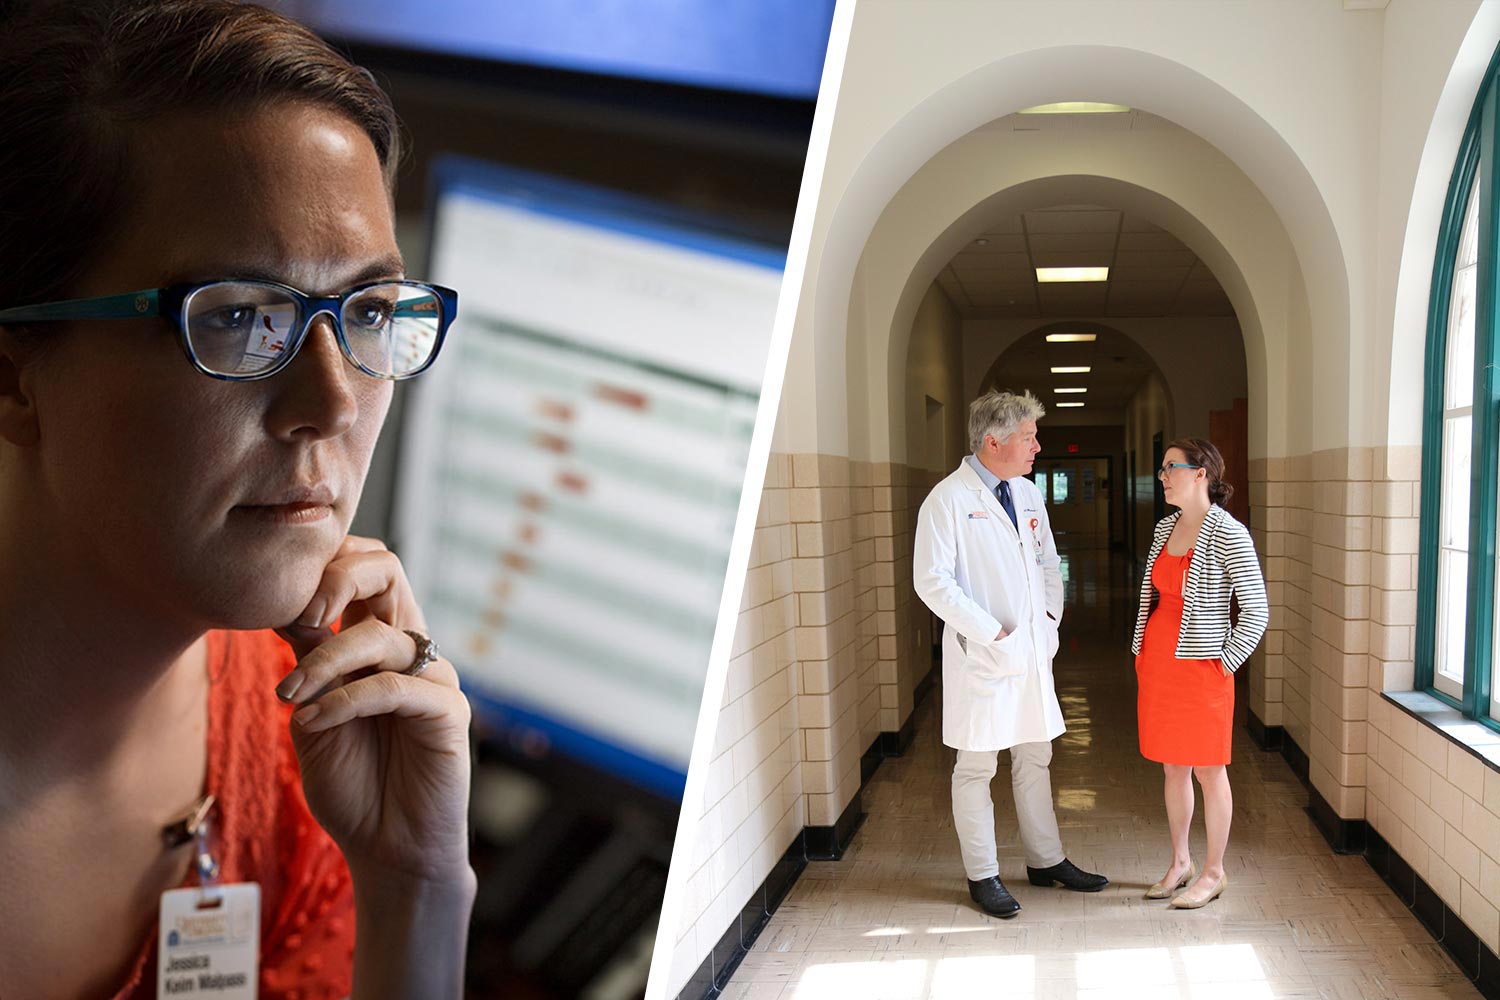 Jessica Keim-Malpass, left, looking at a computer monitor, Dr. Randall Moorman, right in long coat, talking to Jessica Keim-Malpass, right in the hallway